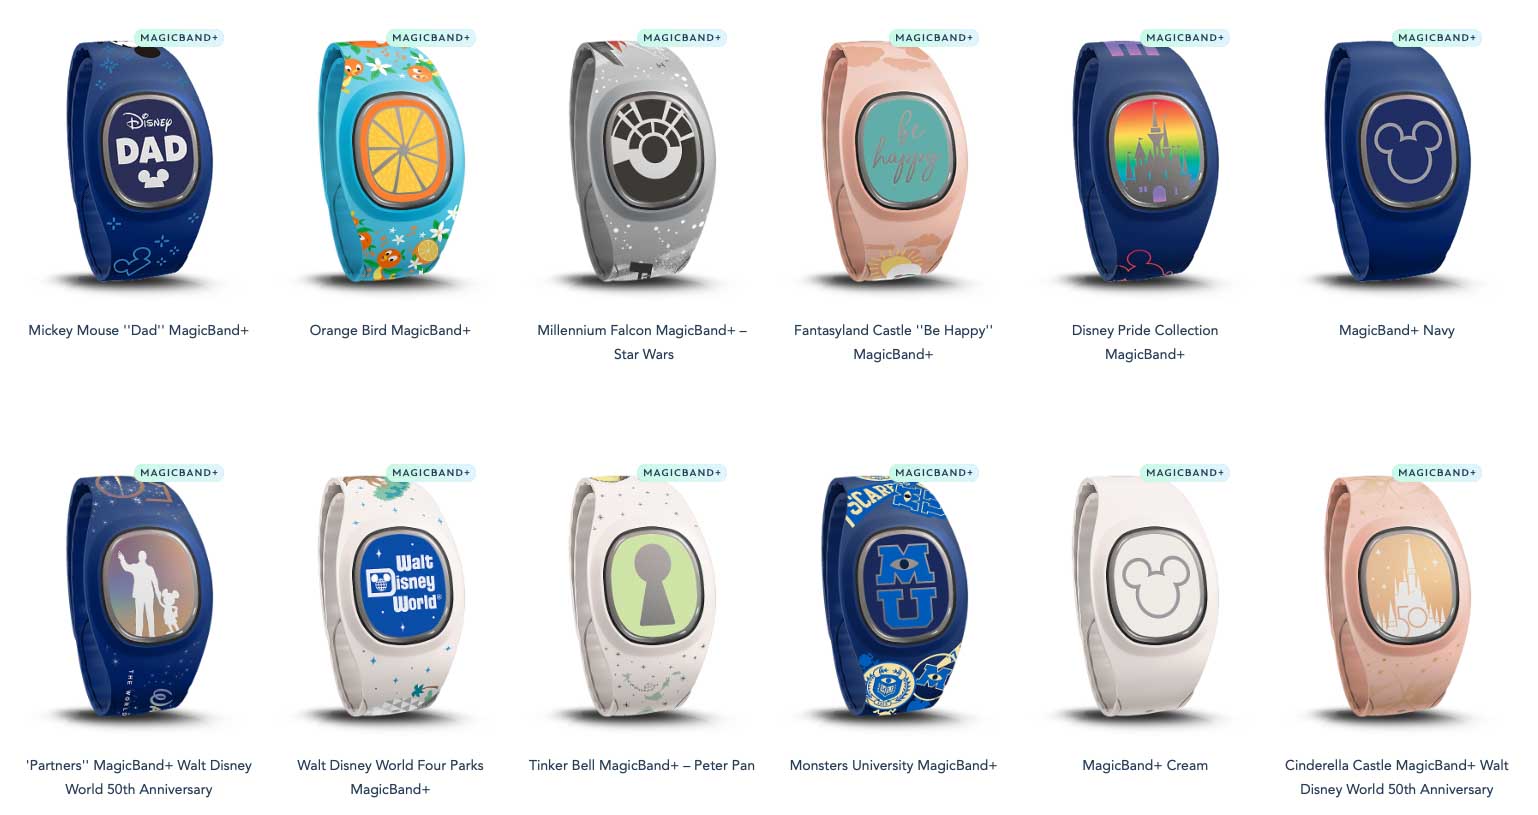 NEWS: New MagicBand+ Now Available in My Disney Experience and at